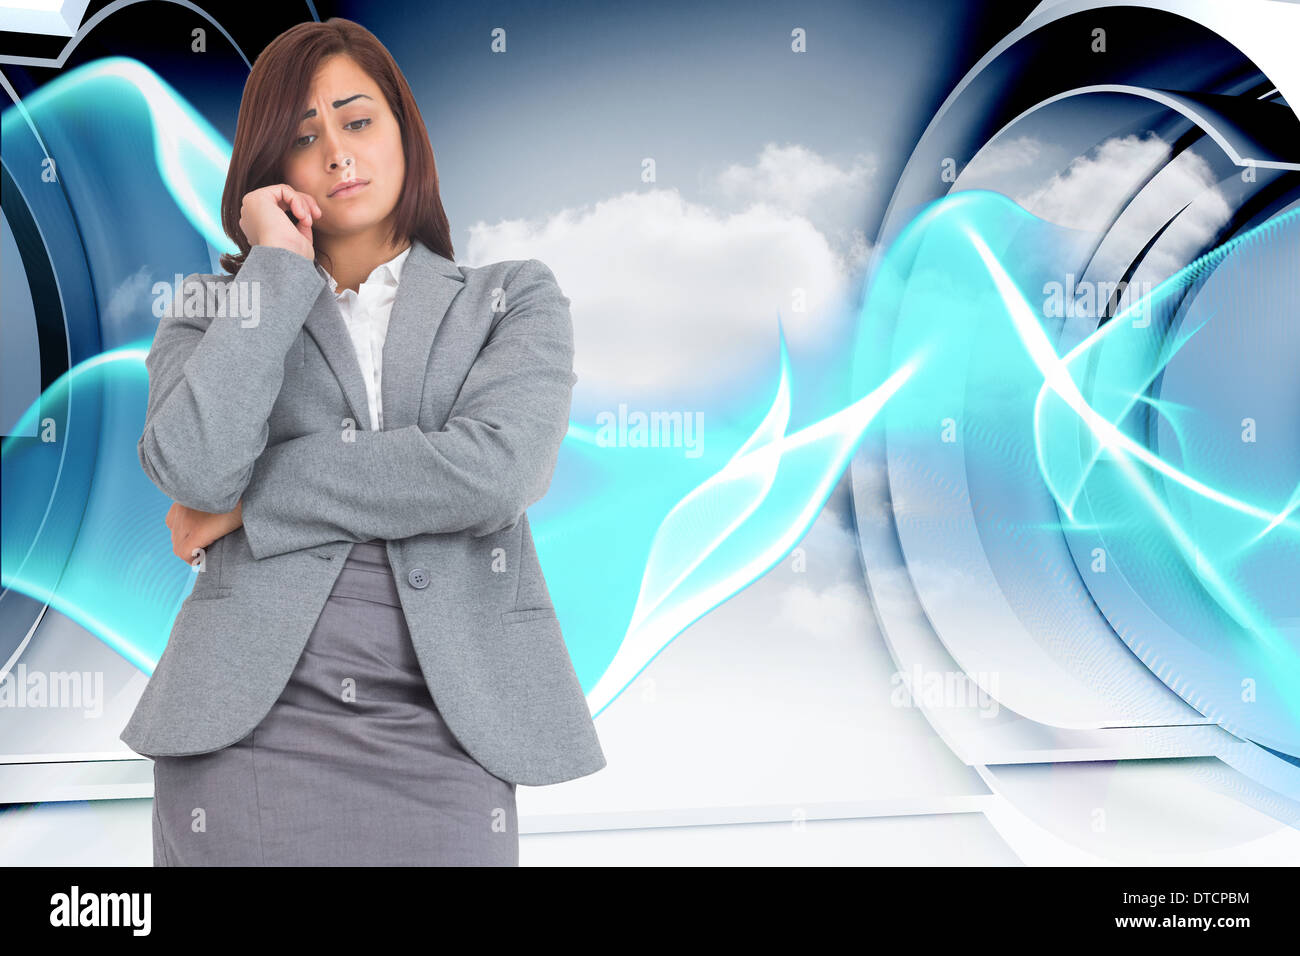 Composite image of worried businesswoman Stock Photo